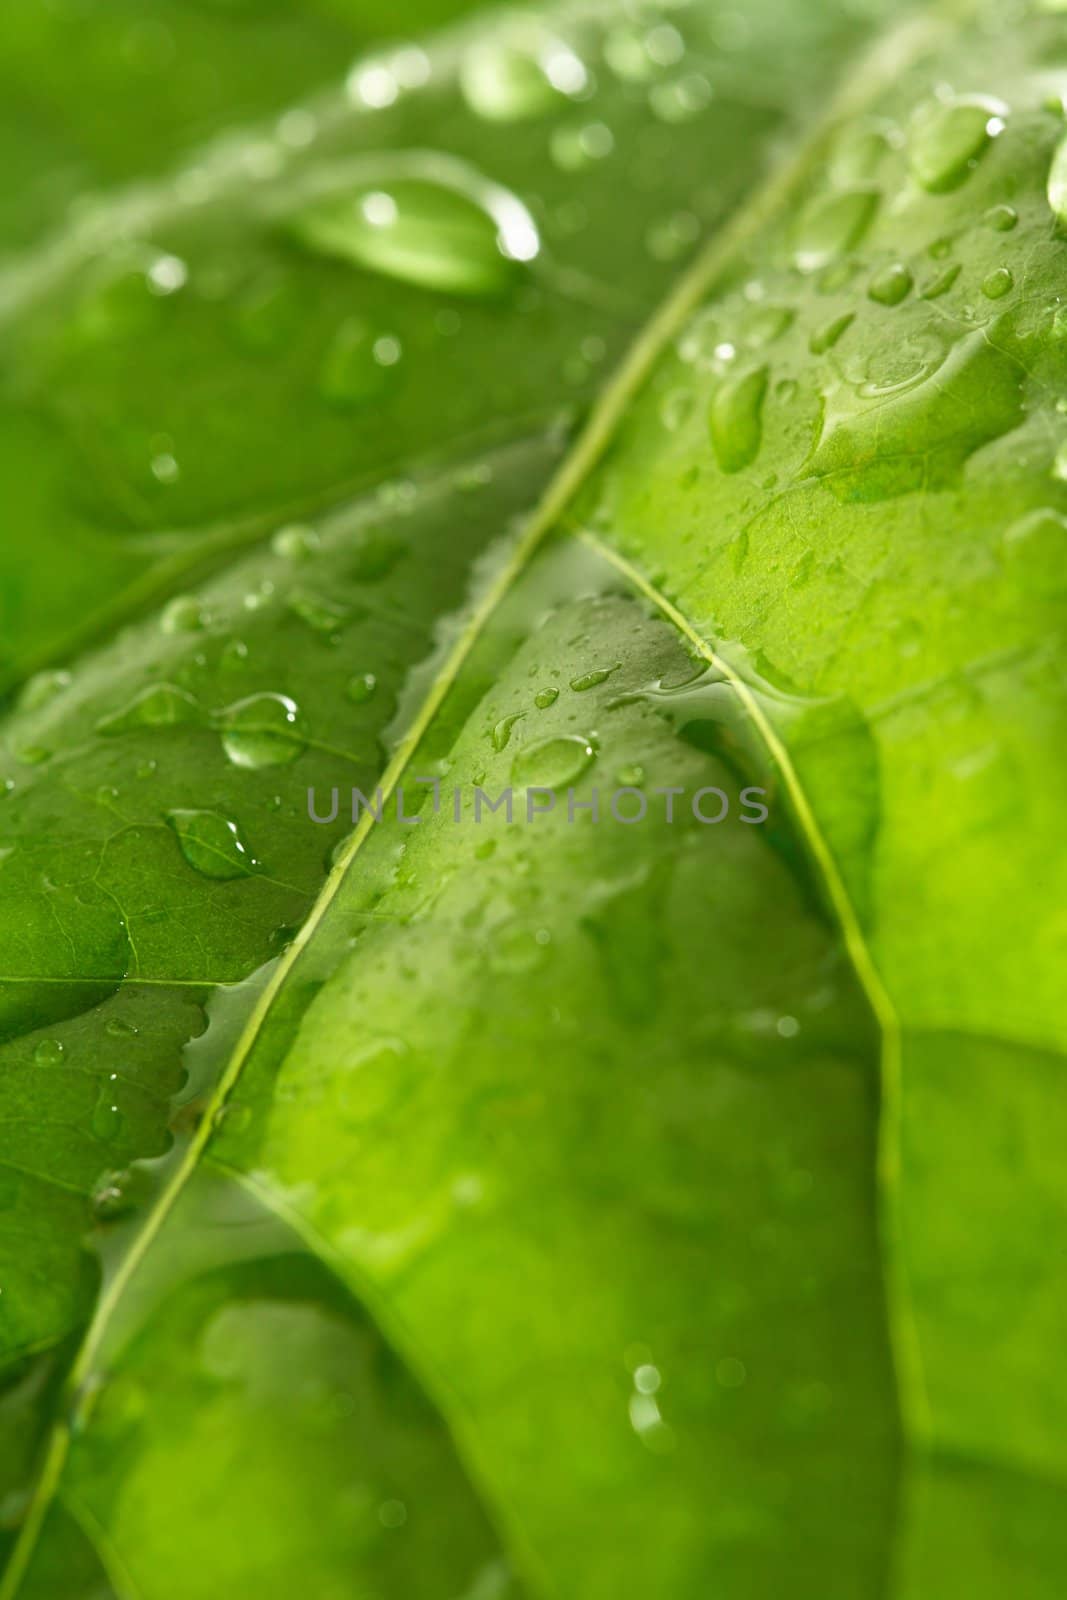 Droplets on a leaf by Stocksnapper